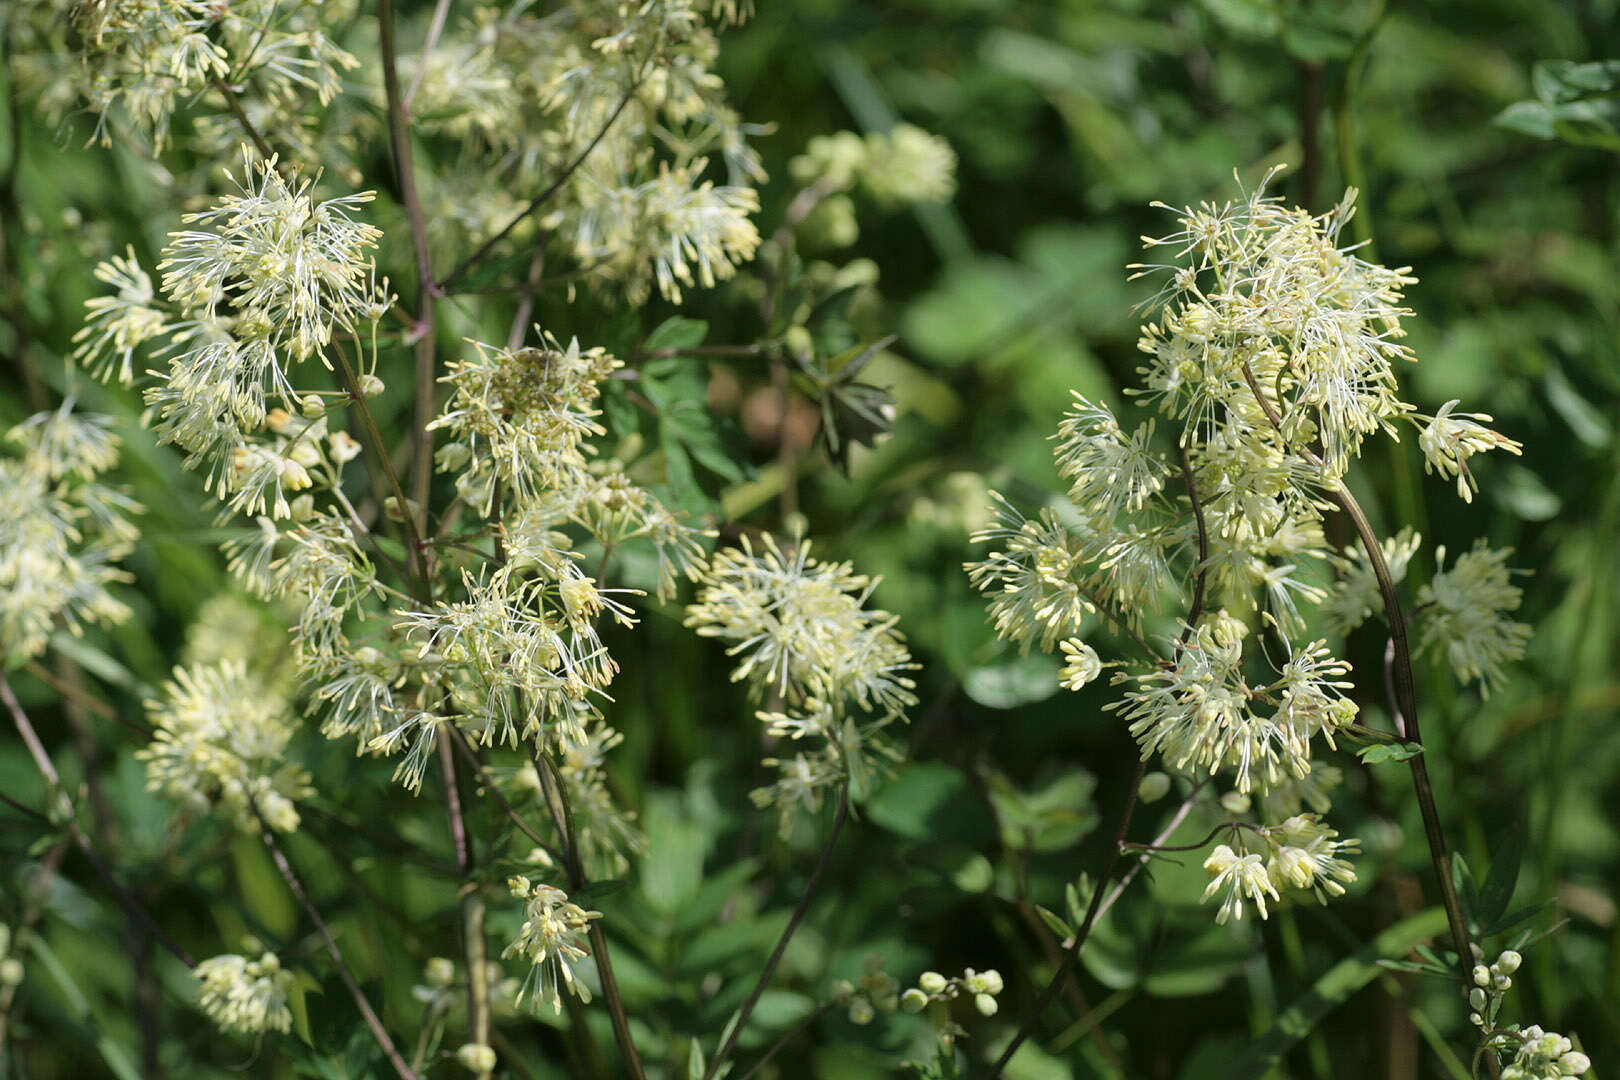 Image of common meadow-rue